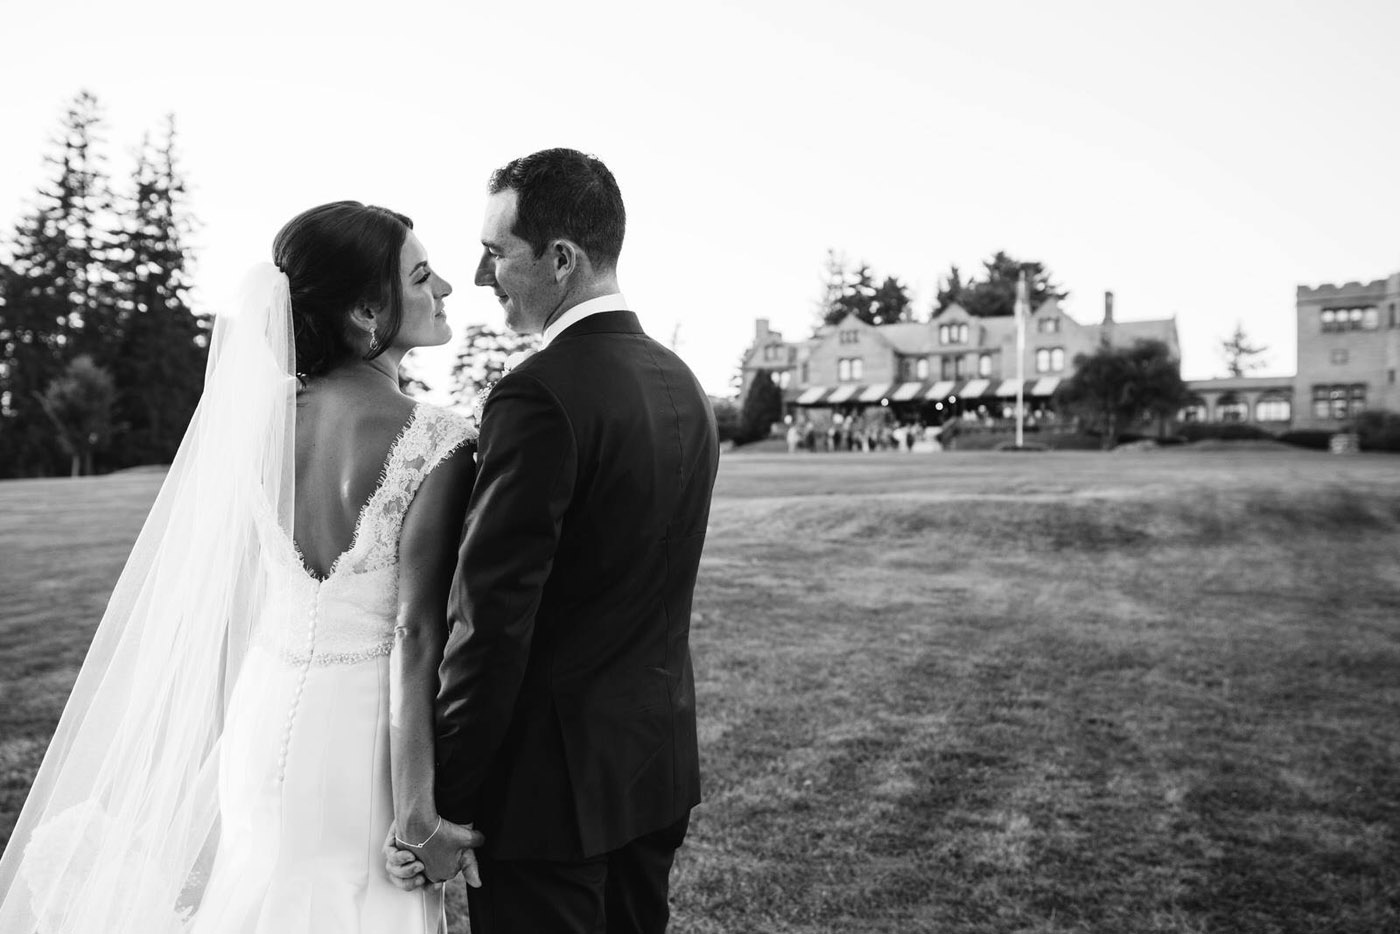 Wedding Images in The Berkshires | Casey Dawn Photography